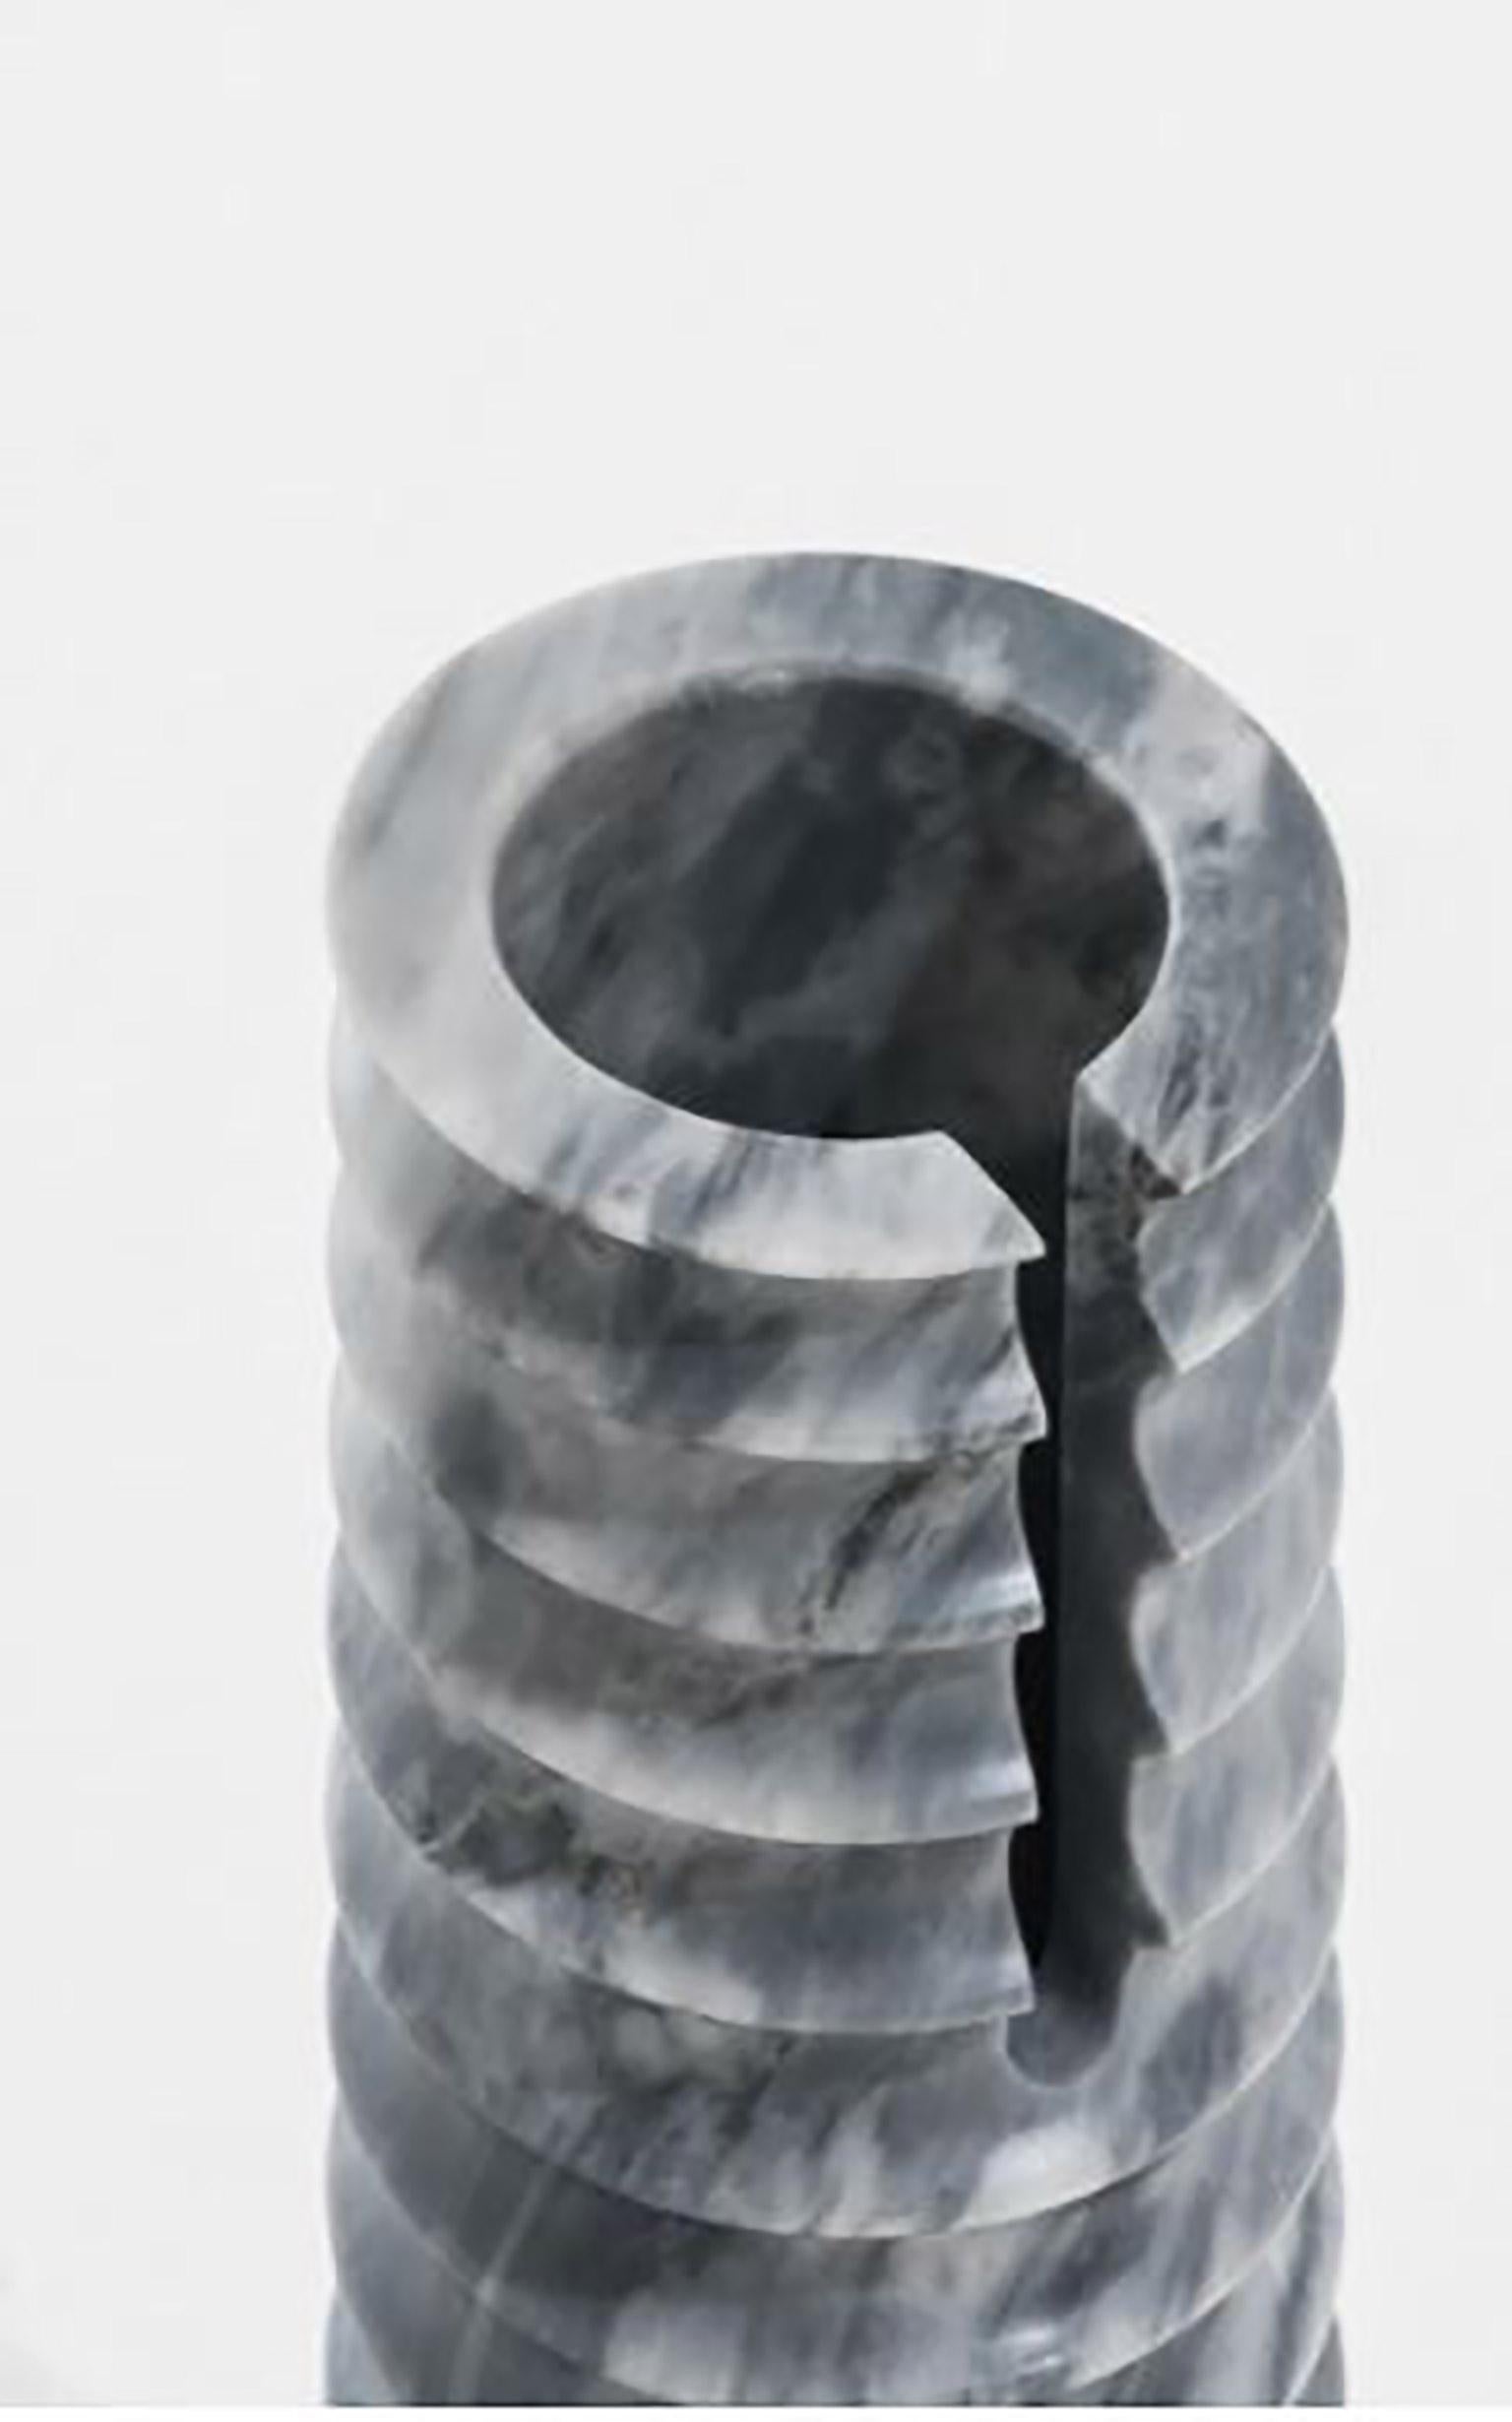 Geometric sculptural vase in Sodalite marble, Simultanea Collection. Centripetal, centrifugal, and movement forces are channeled into stone forms, and rotation on the axis becomes a vase, while an inclined cut suggests a container. Like a mechanical